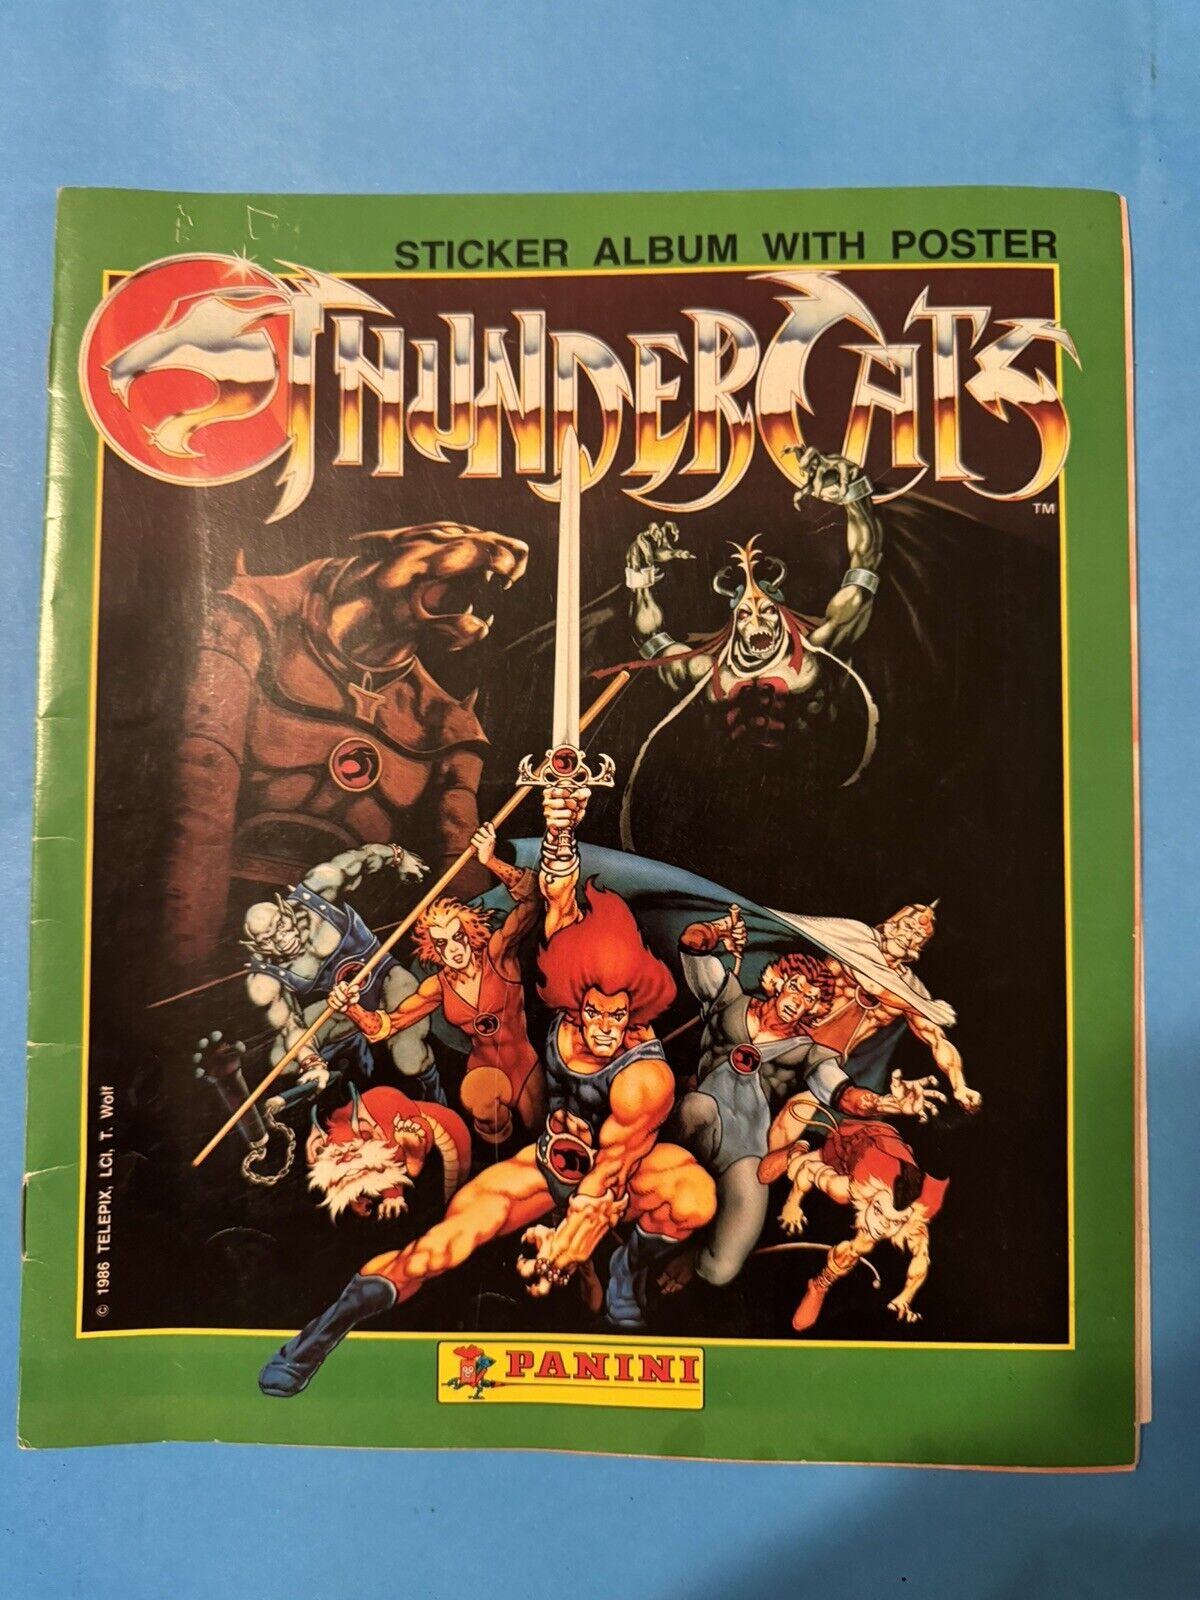 Vintage ThunderCats Sticker Album 1986 Panini Poster Included